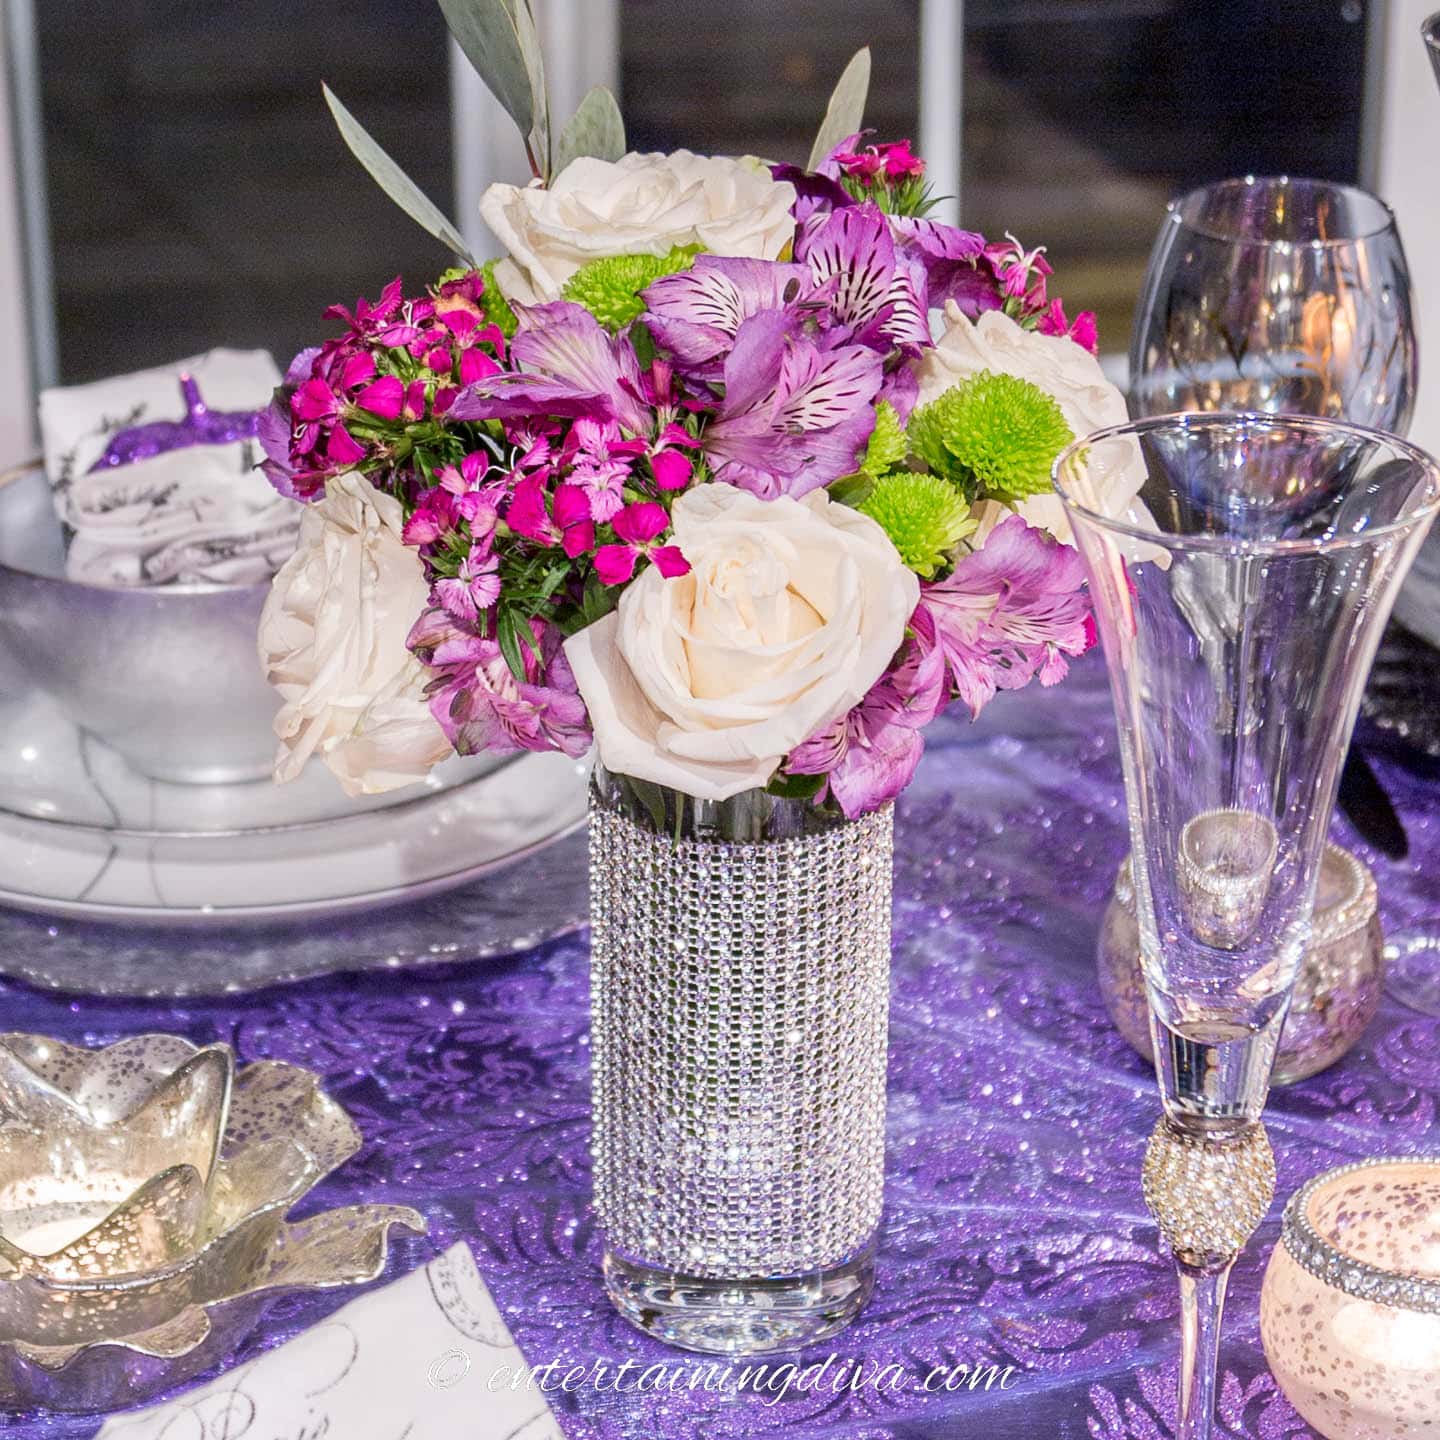 A small bunch of purple white and green flowers on a purple, black and silver Halloween tablescape